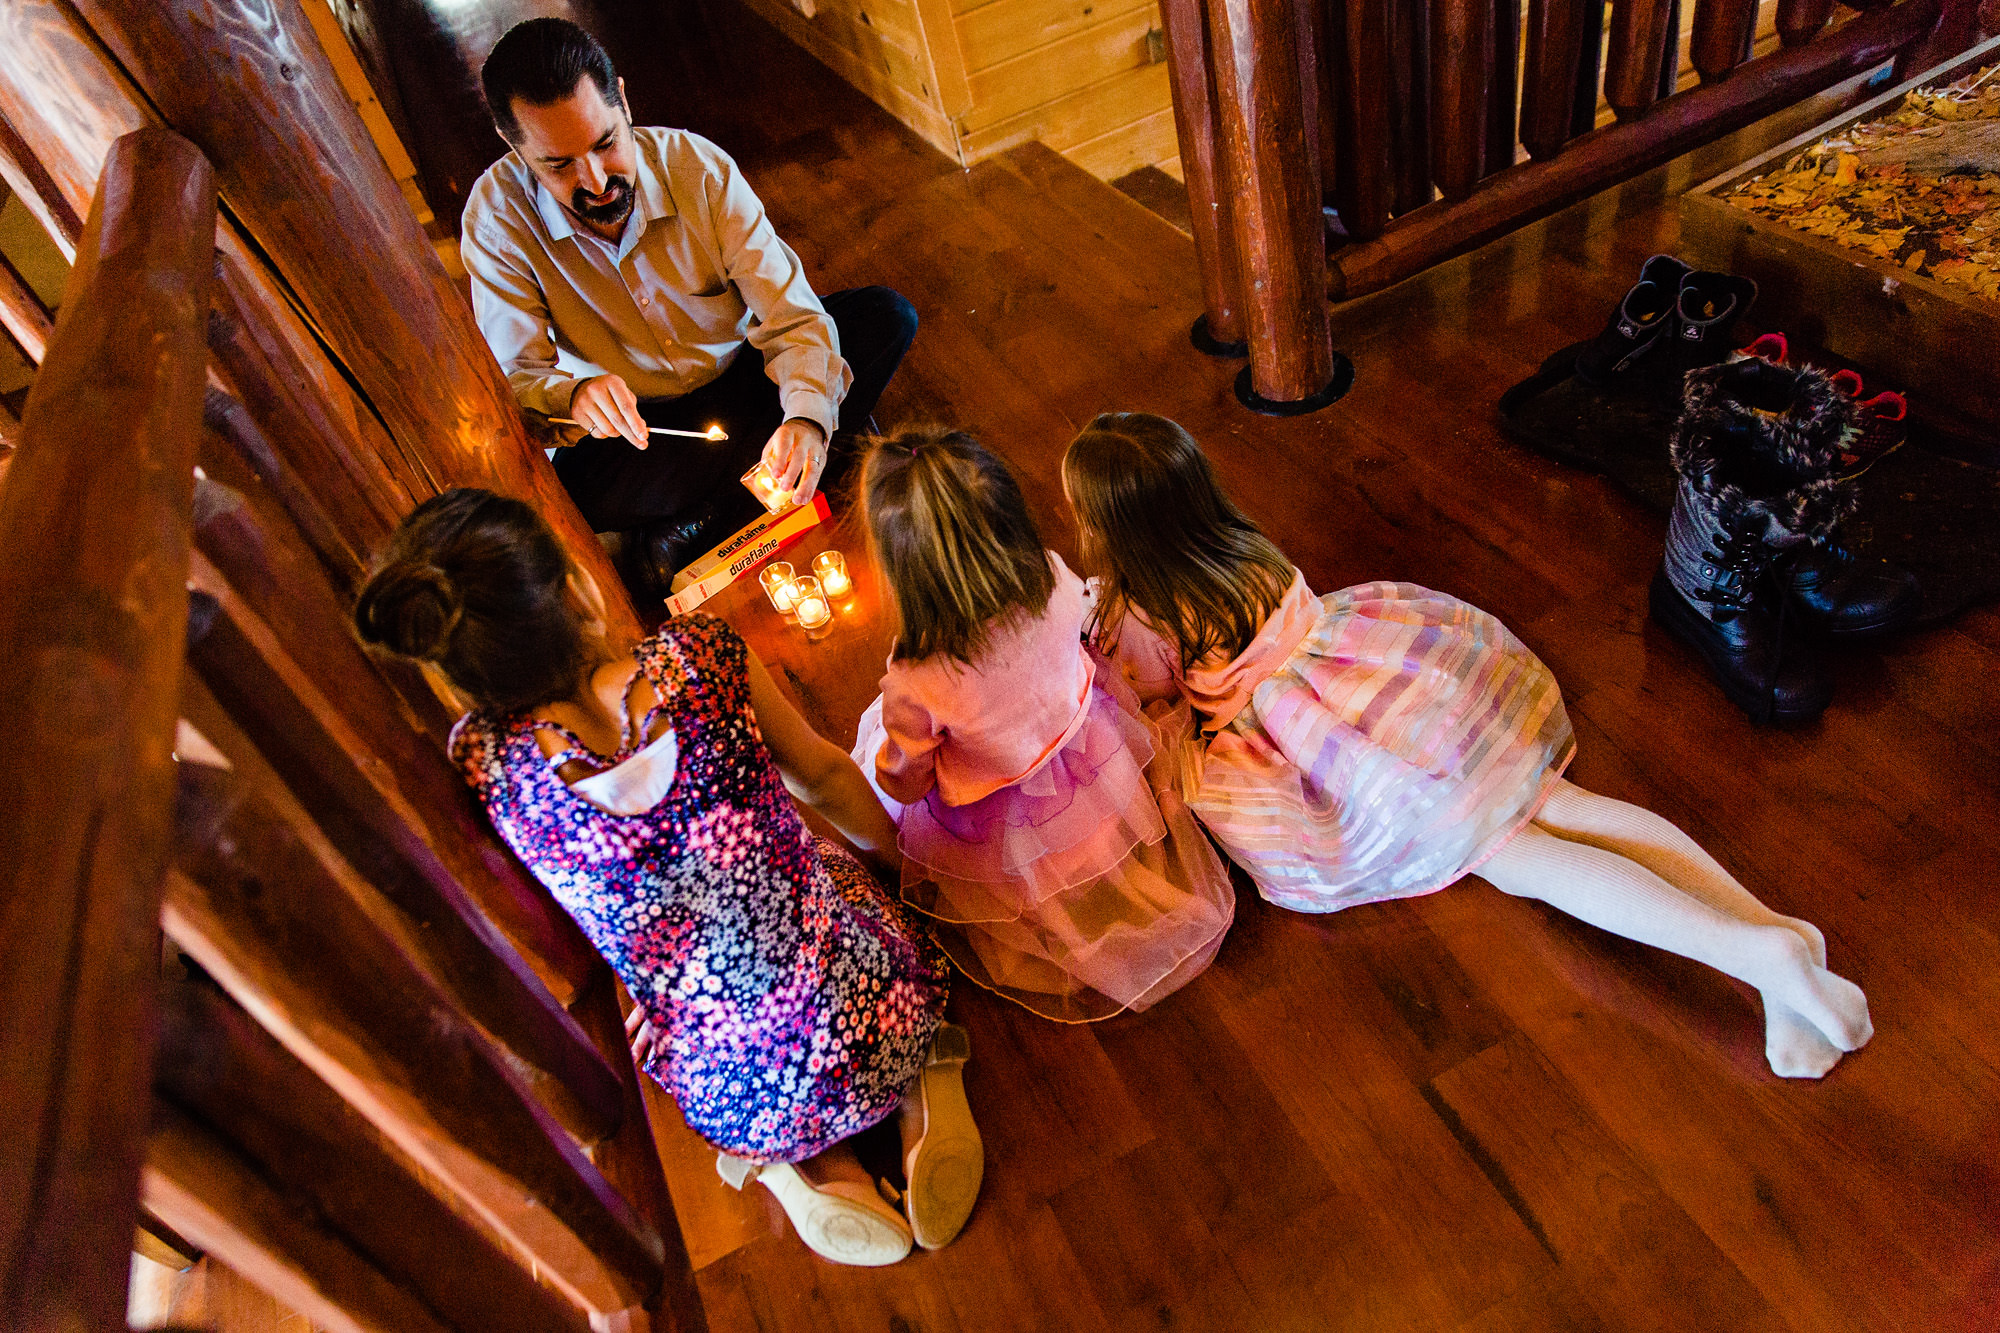 Kids help with setting up a wedding at Moose Lake Ranch in western Maine